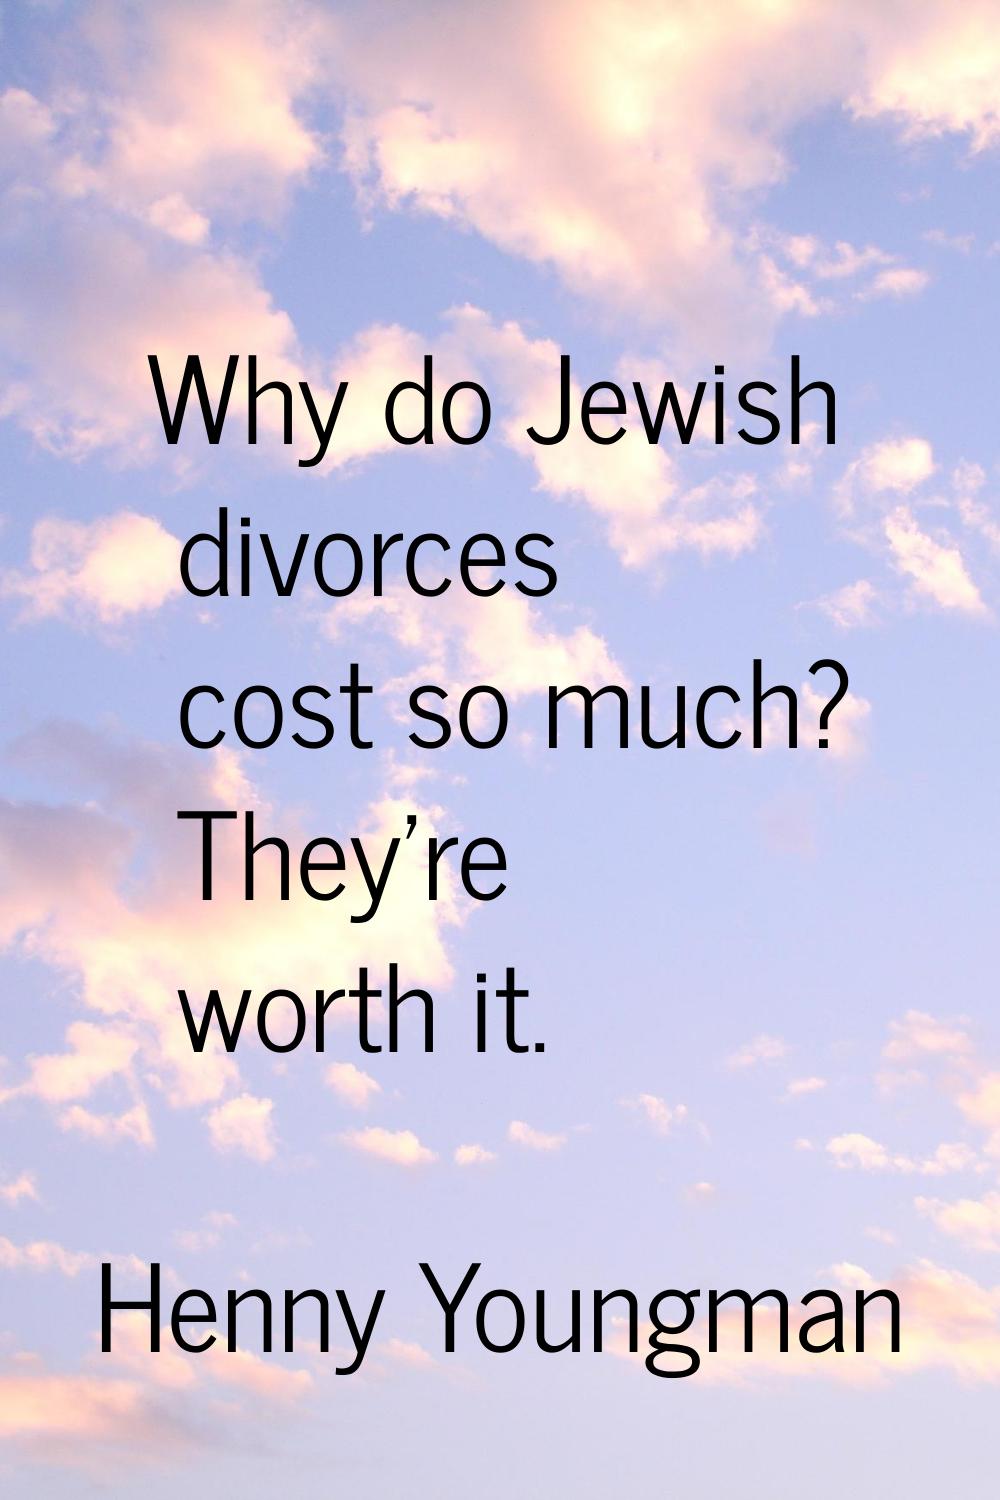 Why do Jewish divorces cost so much? They're worth it.